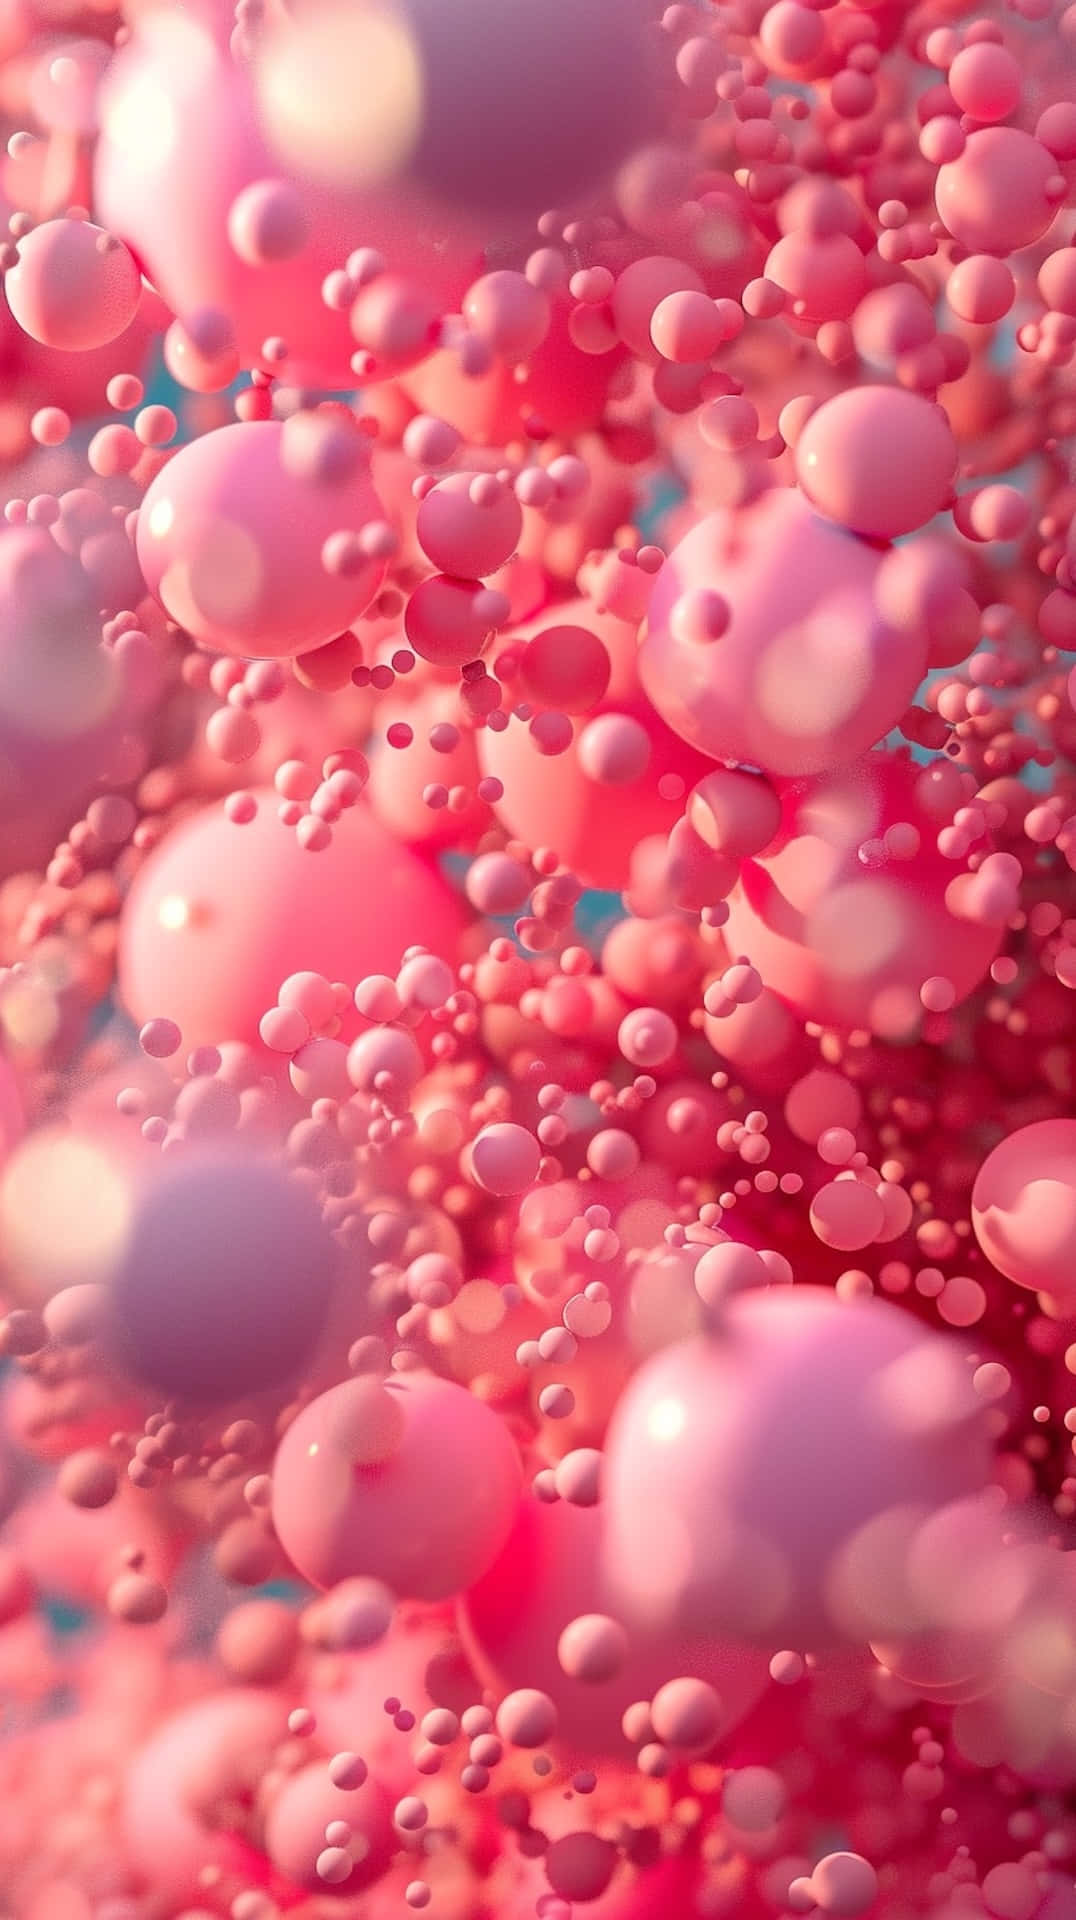 Pink3 D Spheres Abstract Wallpaper